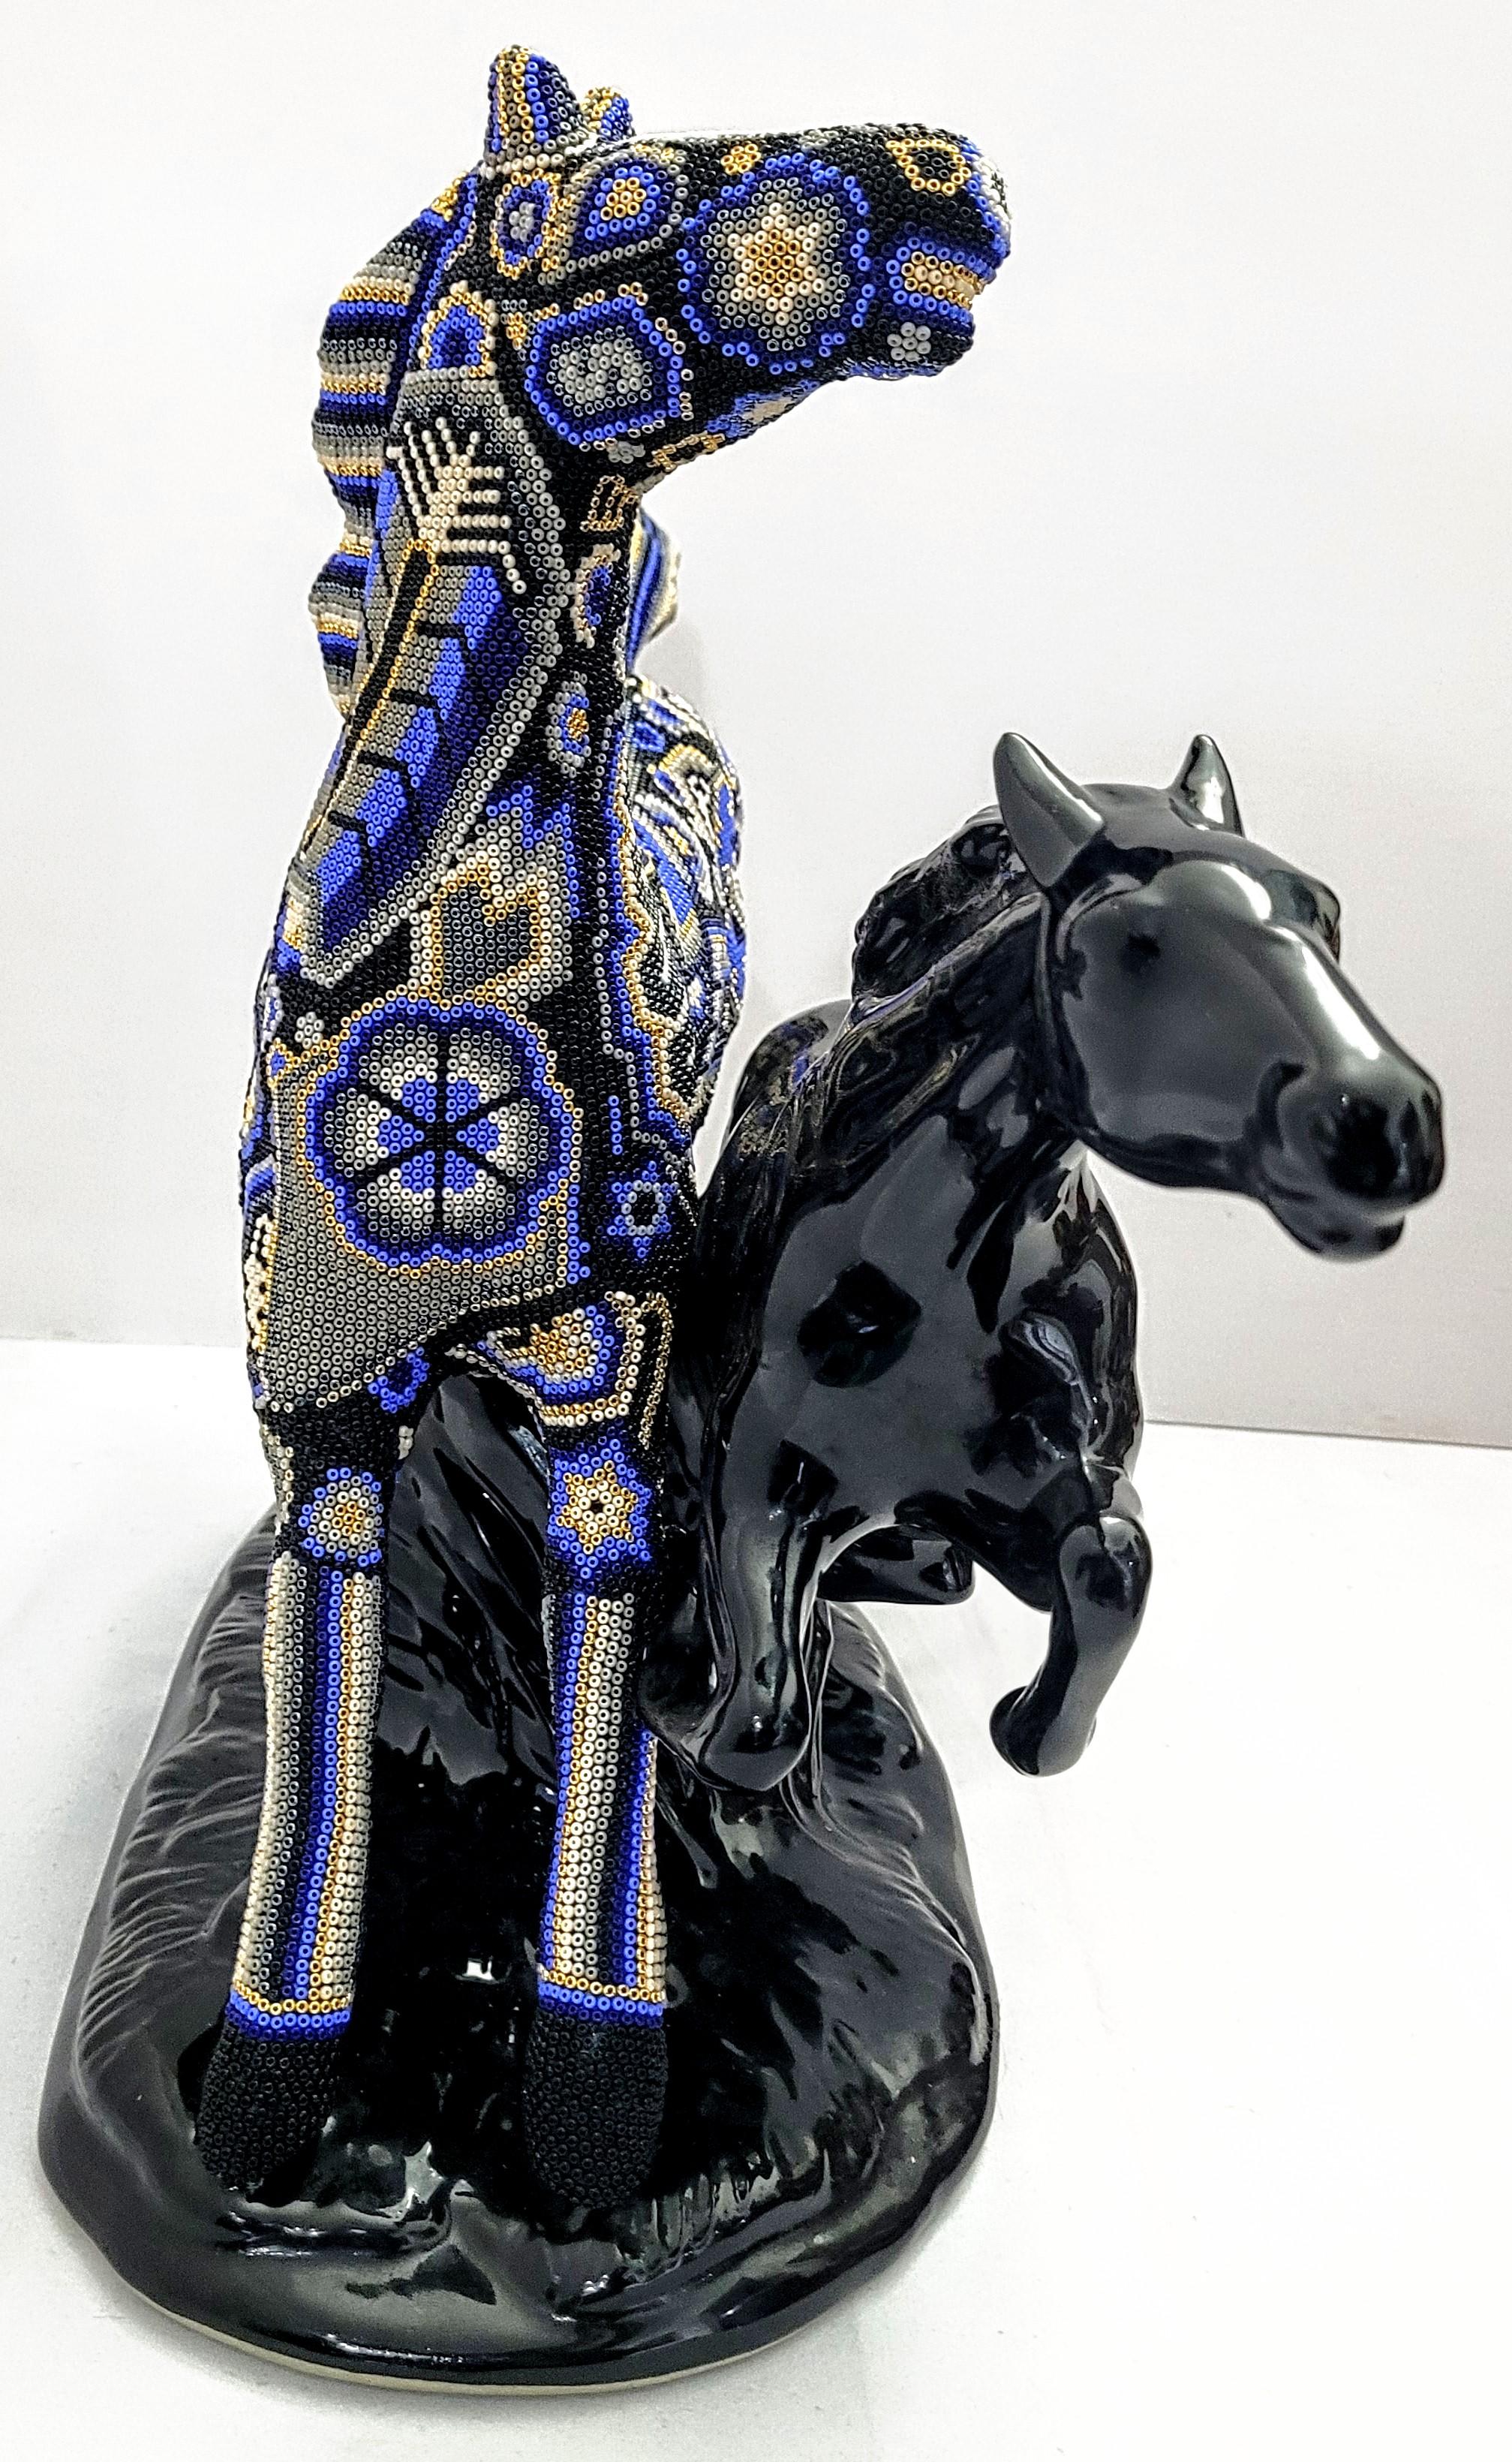 Wild Horses from Huichol Alteration Series  - Sculpture by CHROMA aka Rick Wolfryd 